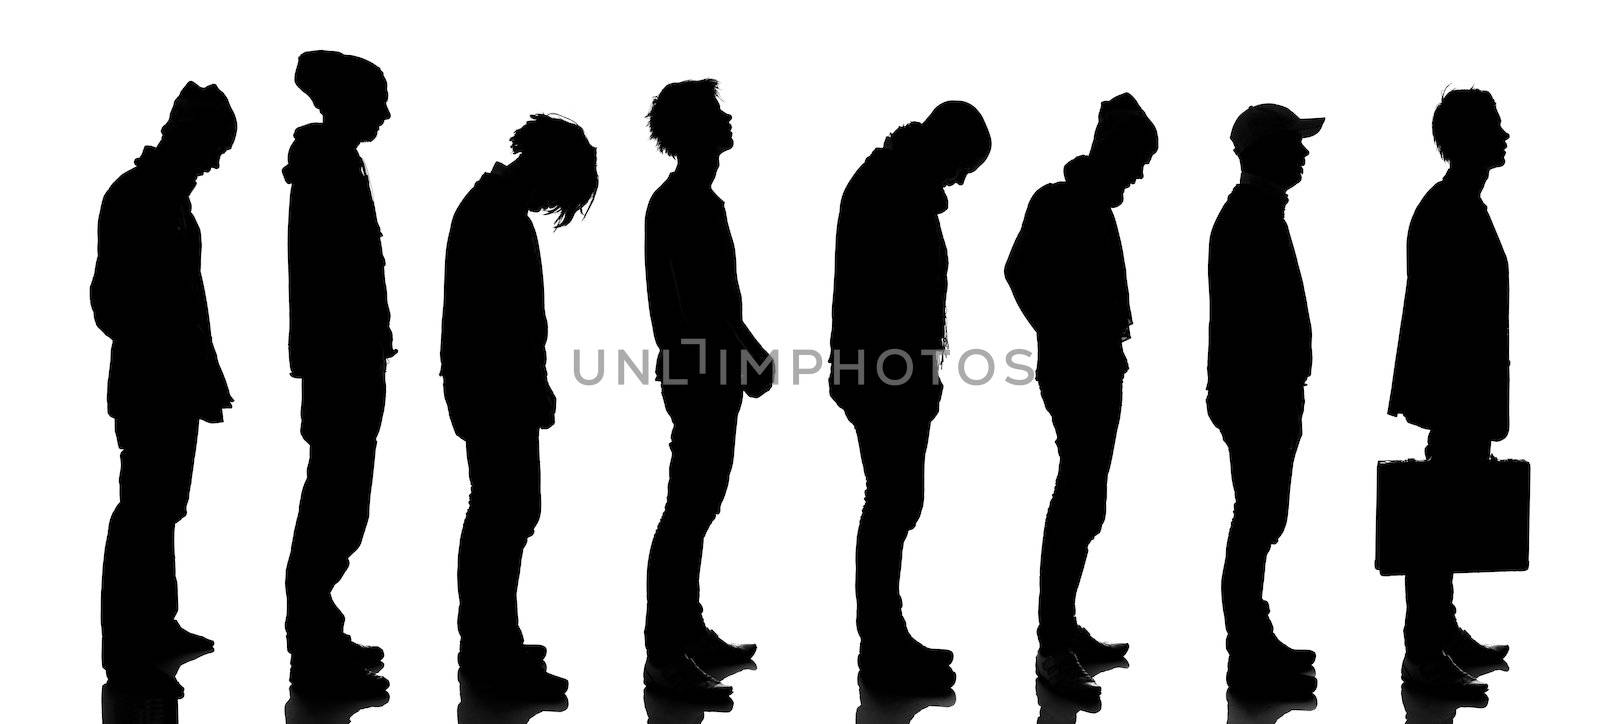 Silhouette of people waiting in line isolated on white background